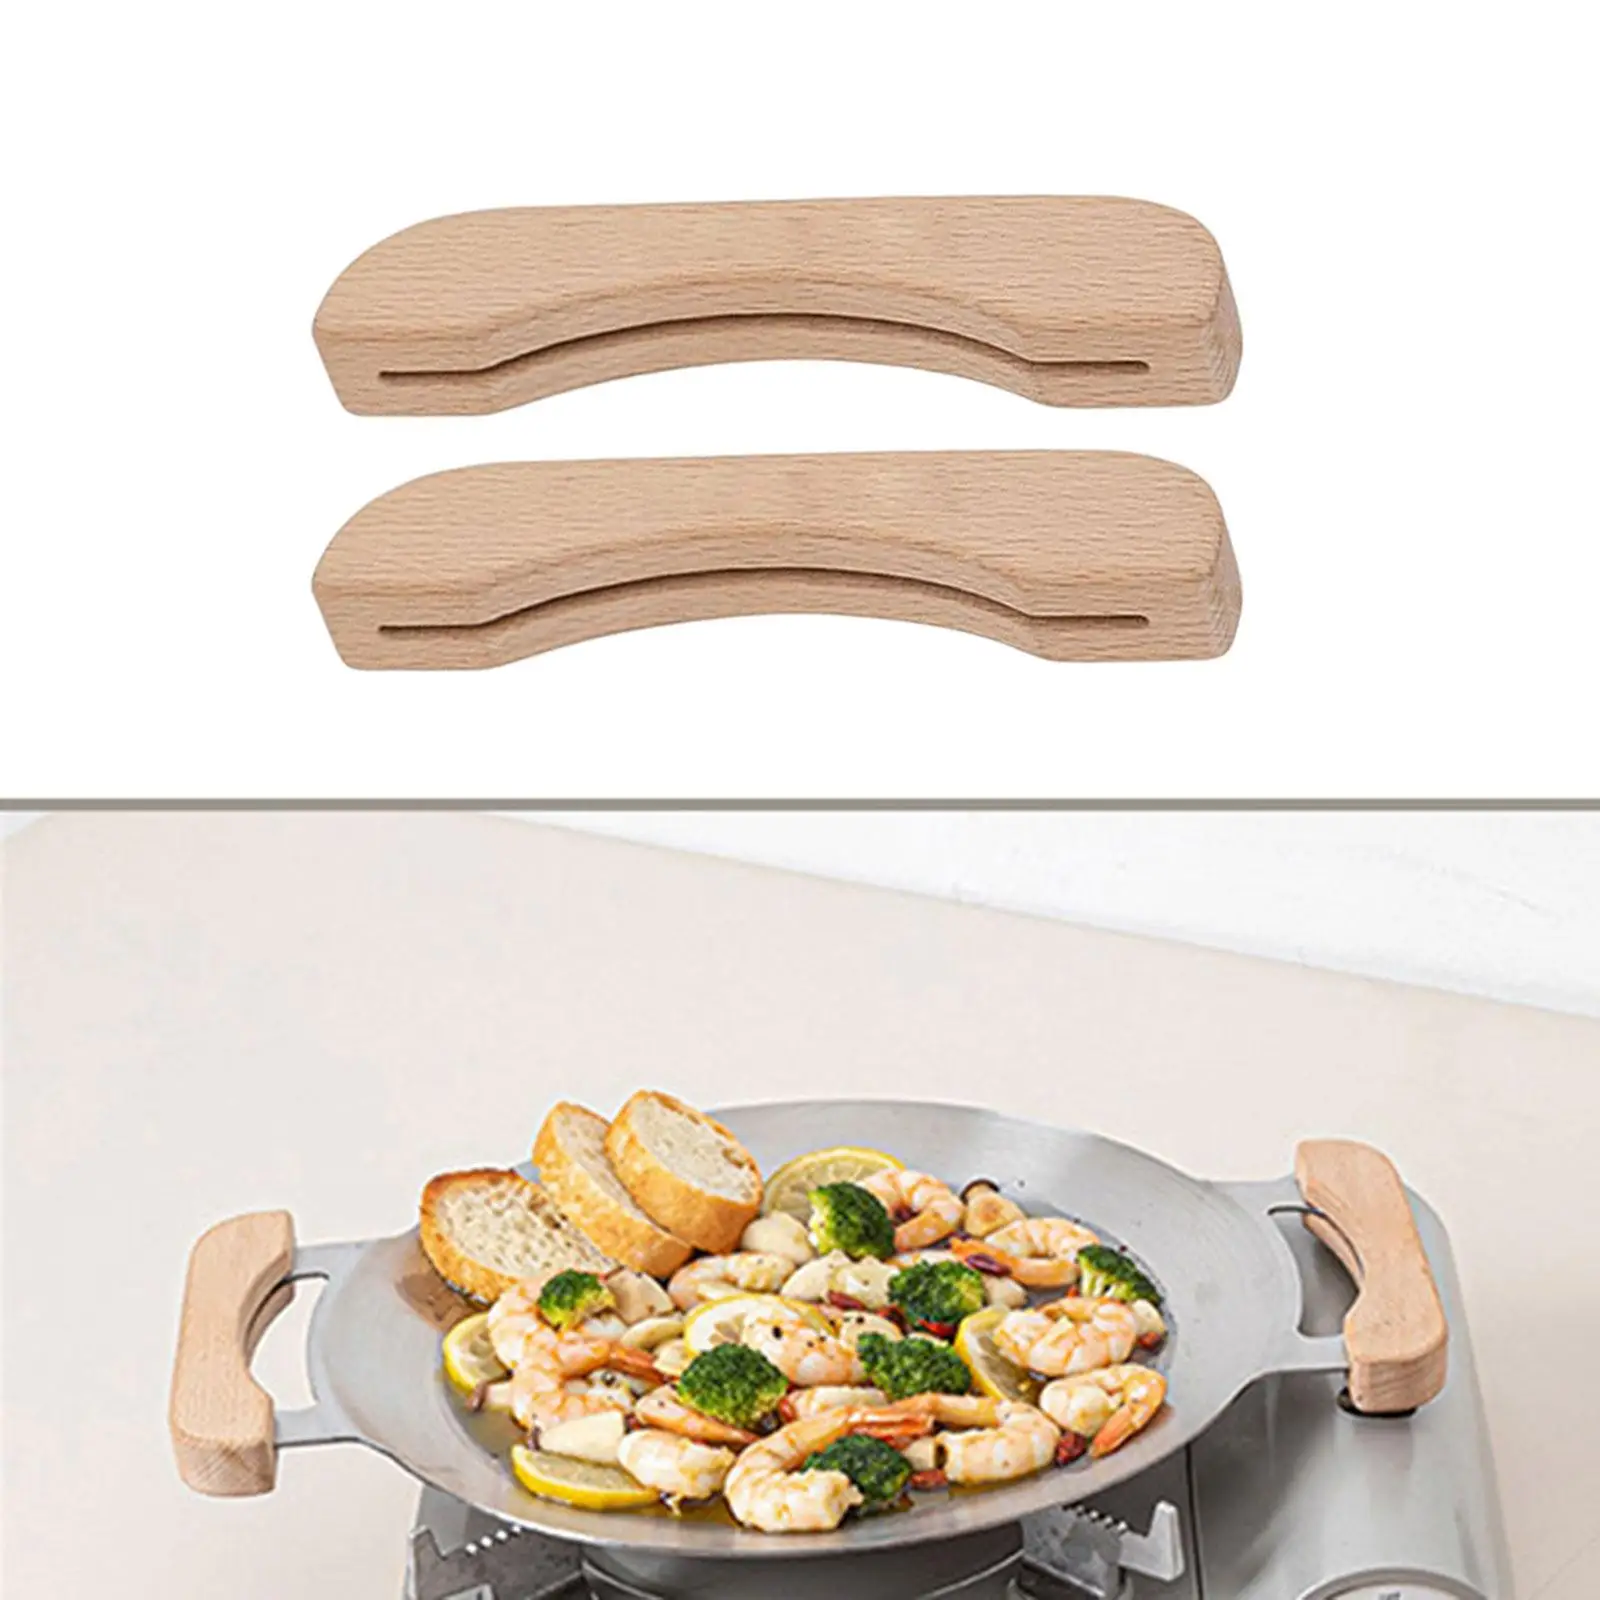 2Pcs Solid Wood BBQ Pan Handle Anti Scald Insulated for Grill Pan Outdoor